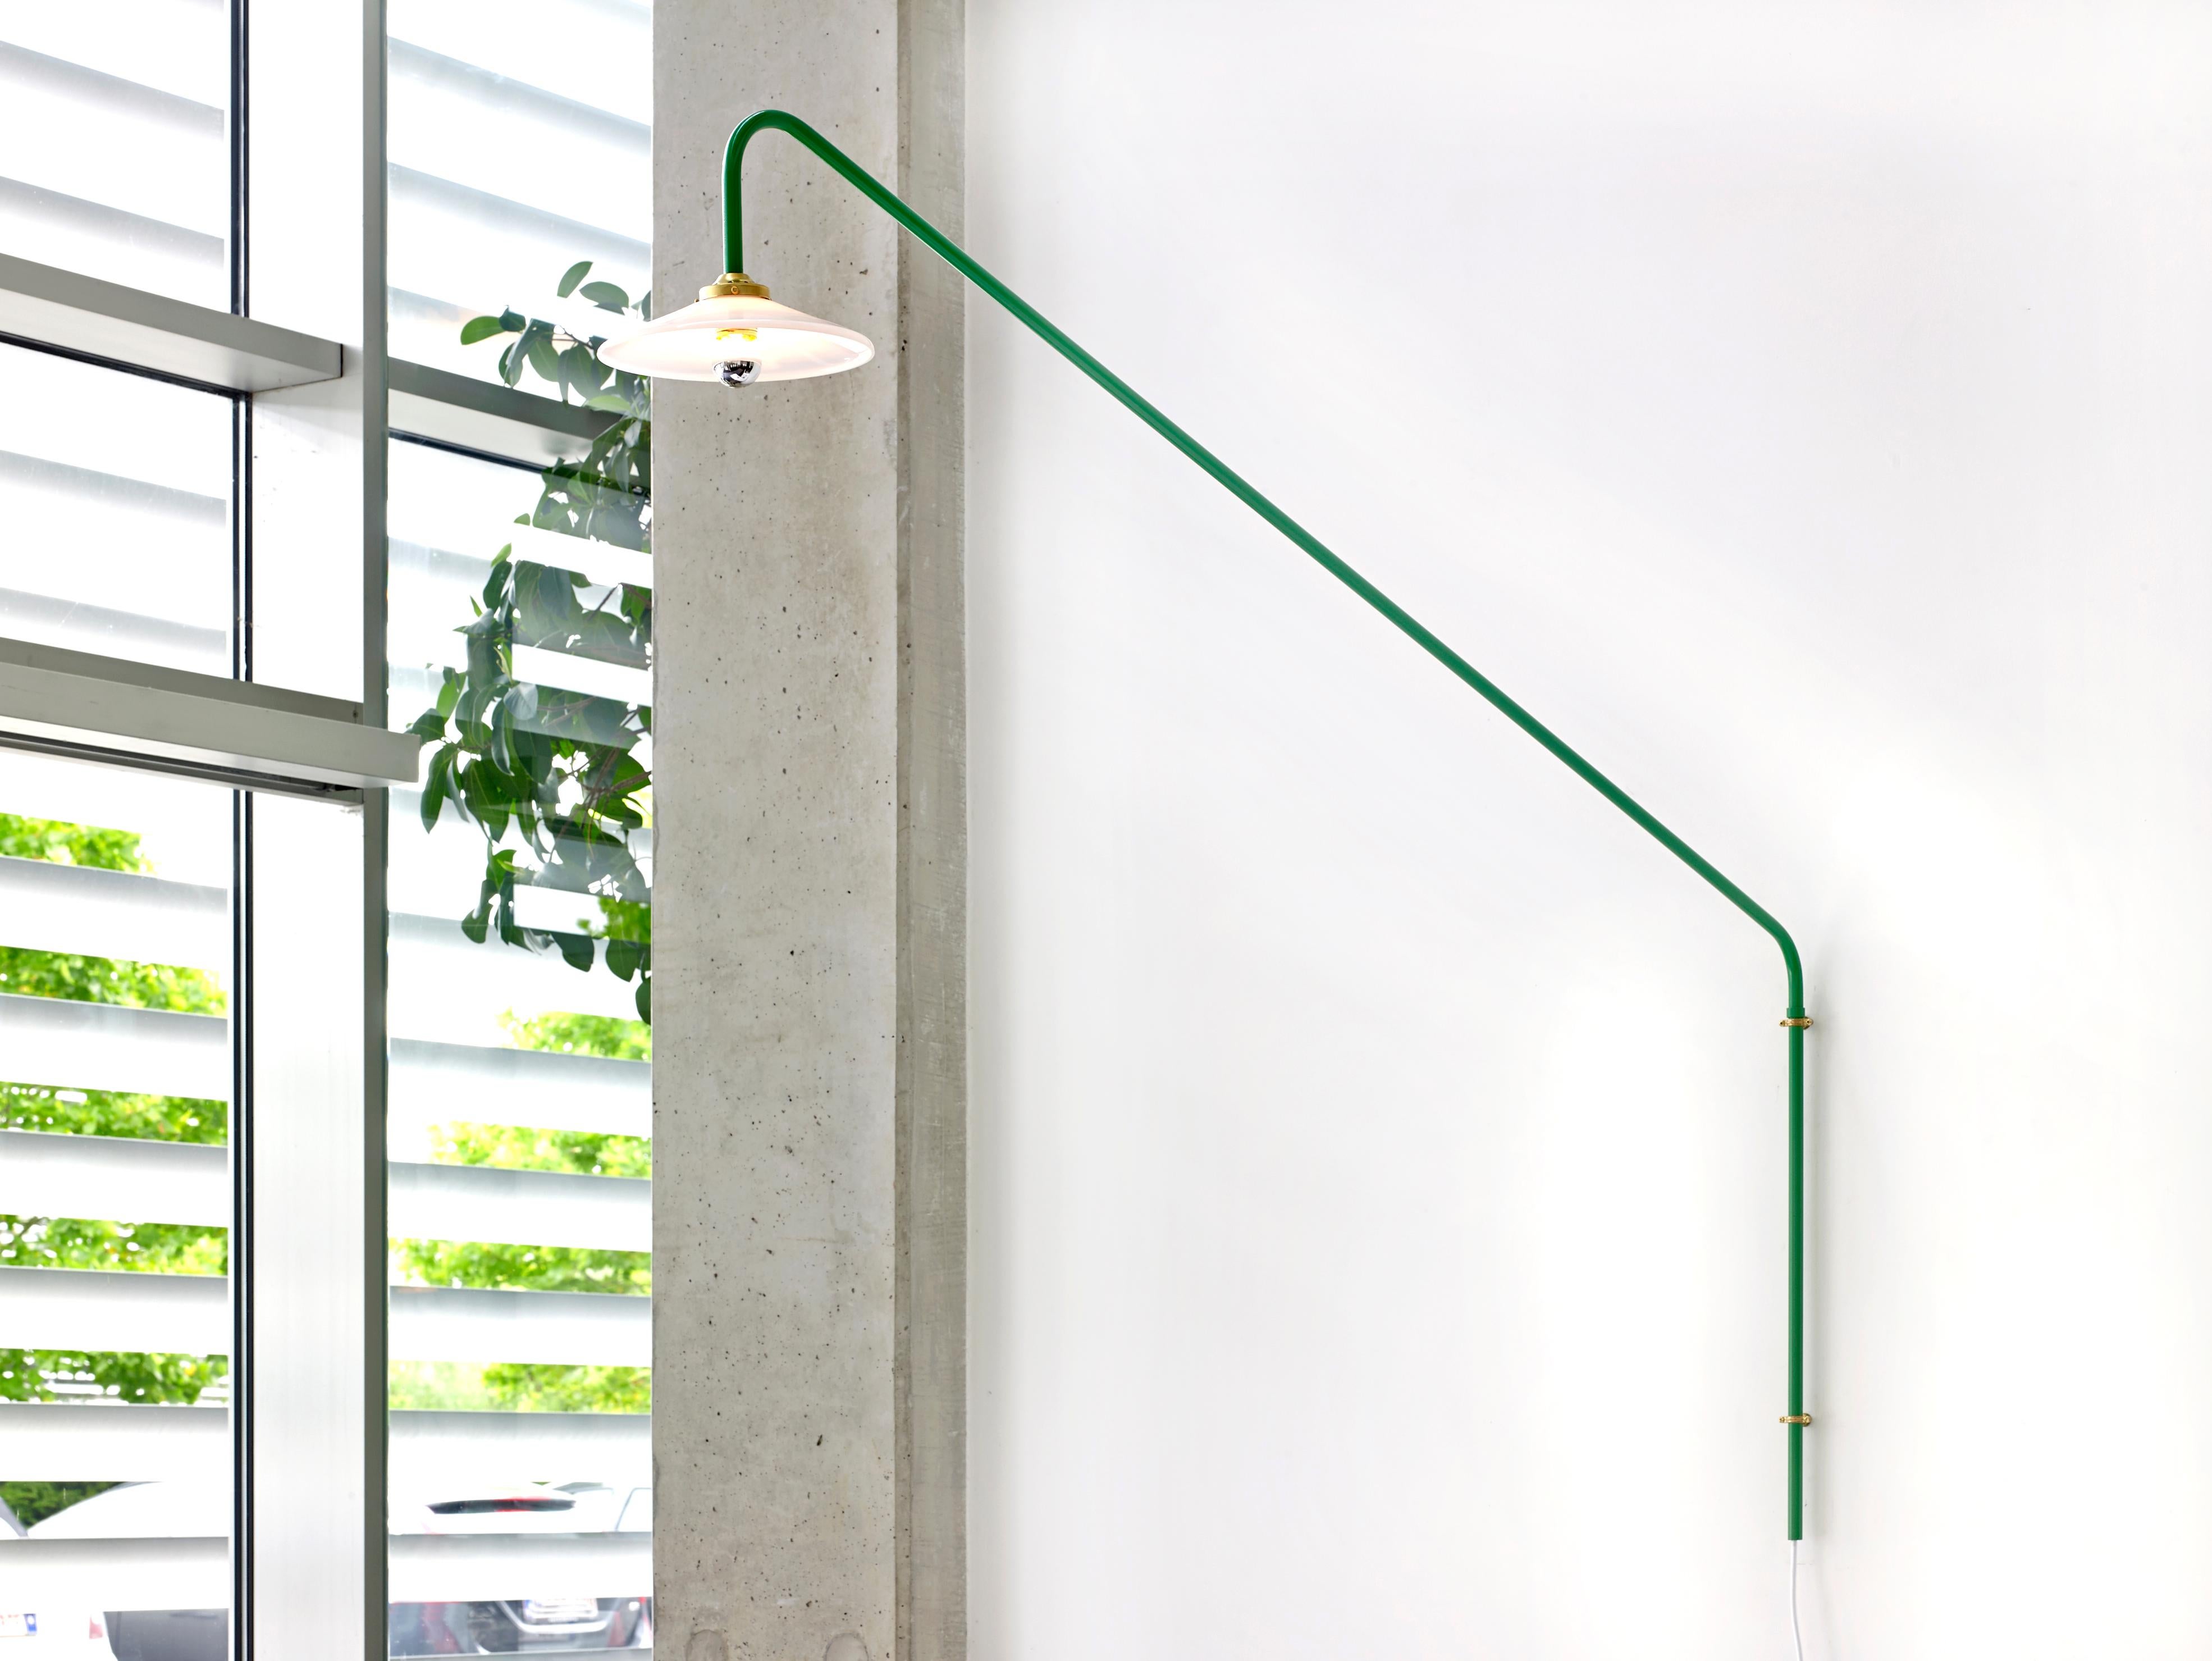 Hanging Lamp N°1 by Muller Van Severen x Valerie Objects

Dimensions: H. 140 X 183 X 25
Finish: Green

specifications
— light source: 4W led
— colour tempertaure: K2700 — lumen 350
— IP rating 20
— dimmable

material: 
— lamp frame in steel tube